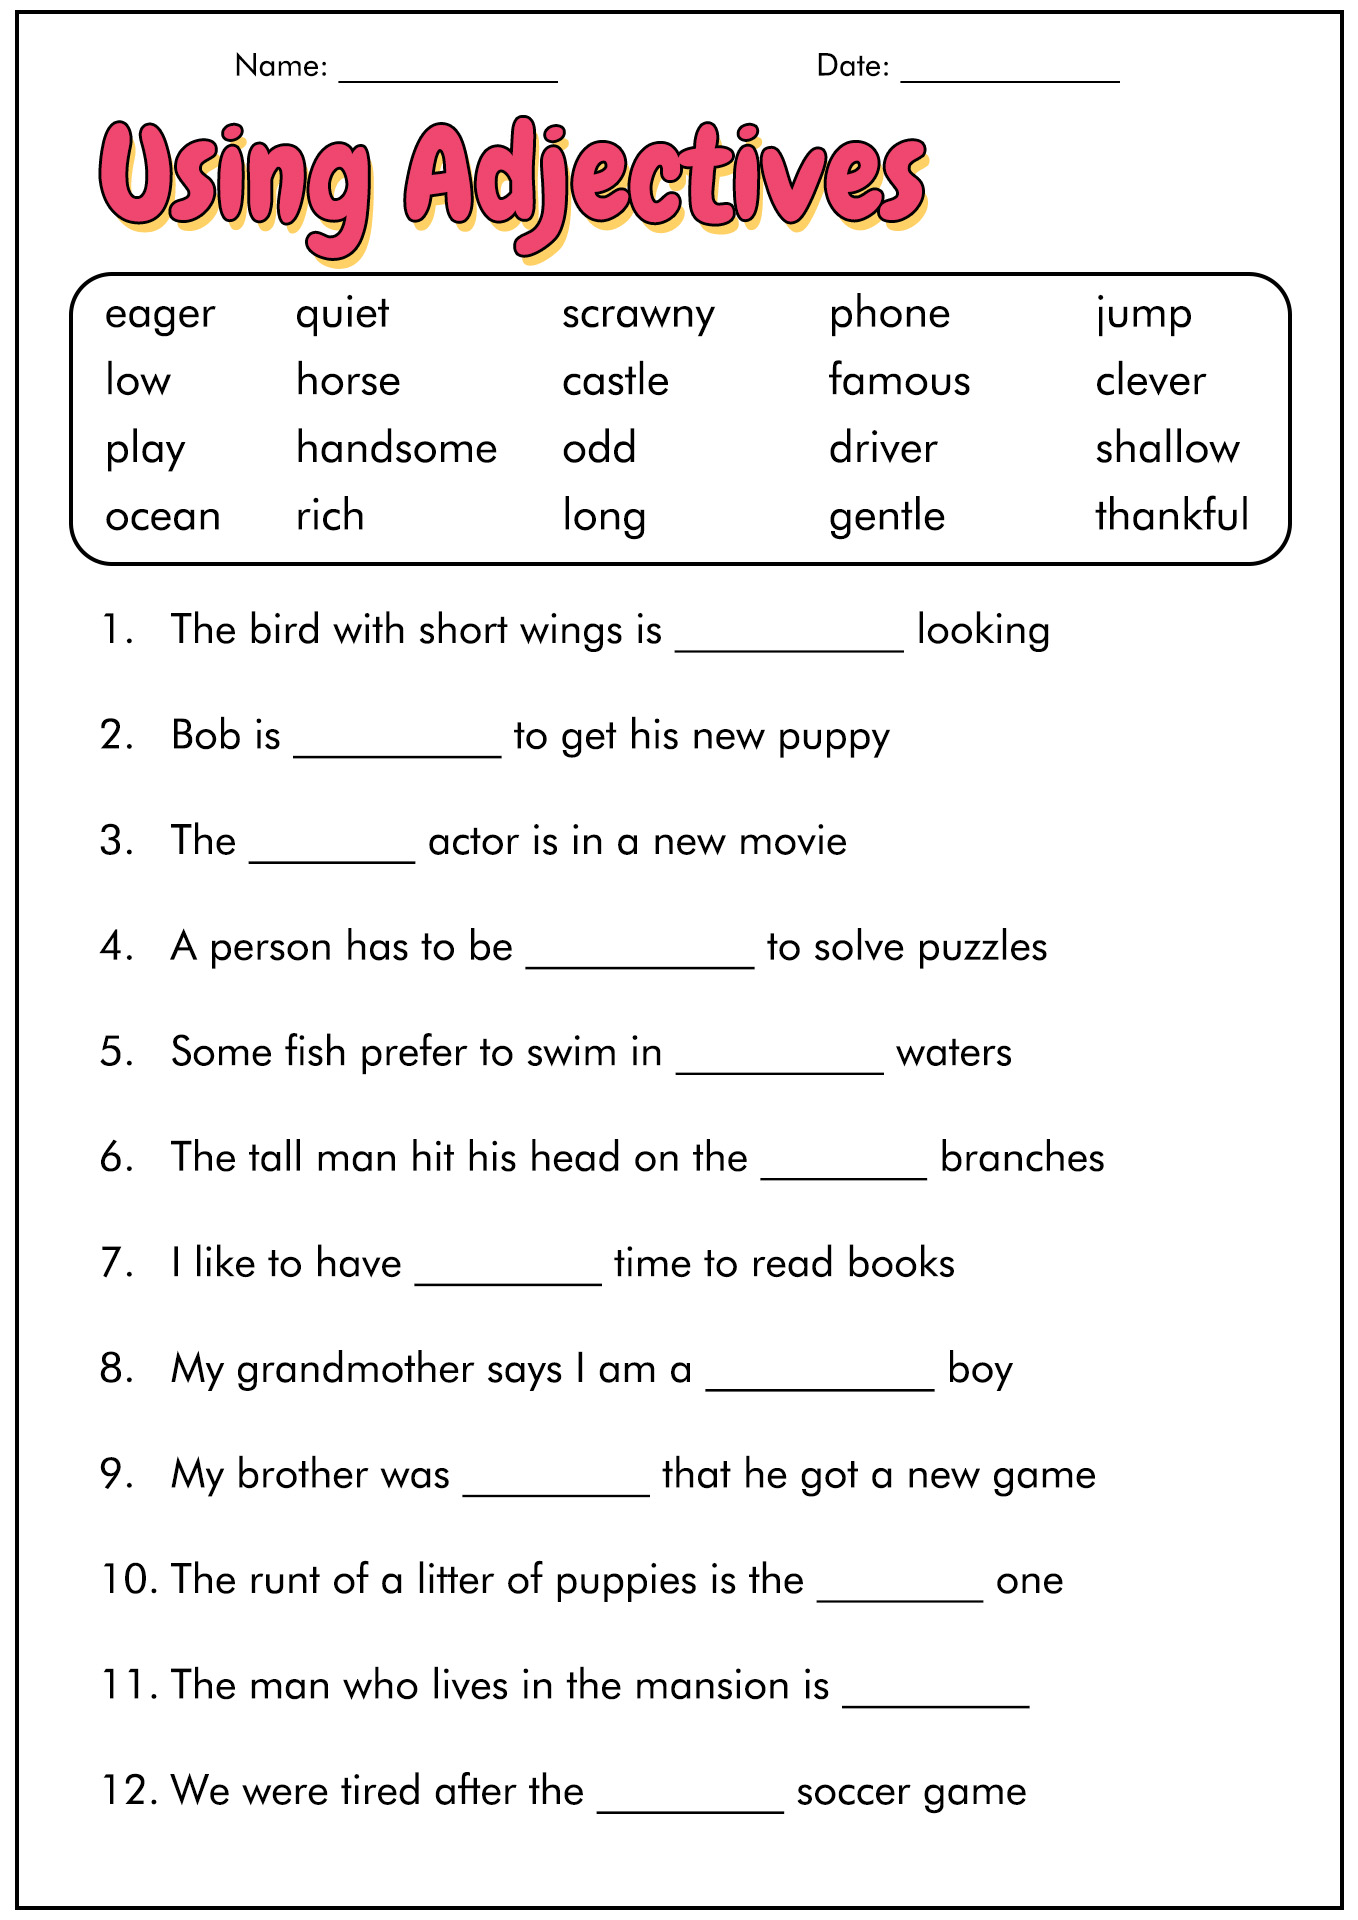 14 Best Images Of 3rd 4th Grade Math Worksheets 4th Grade Math 